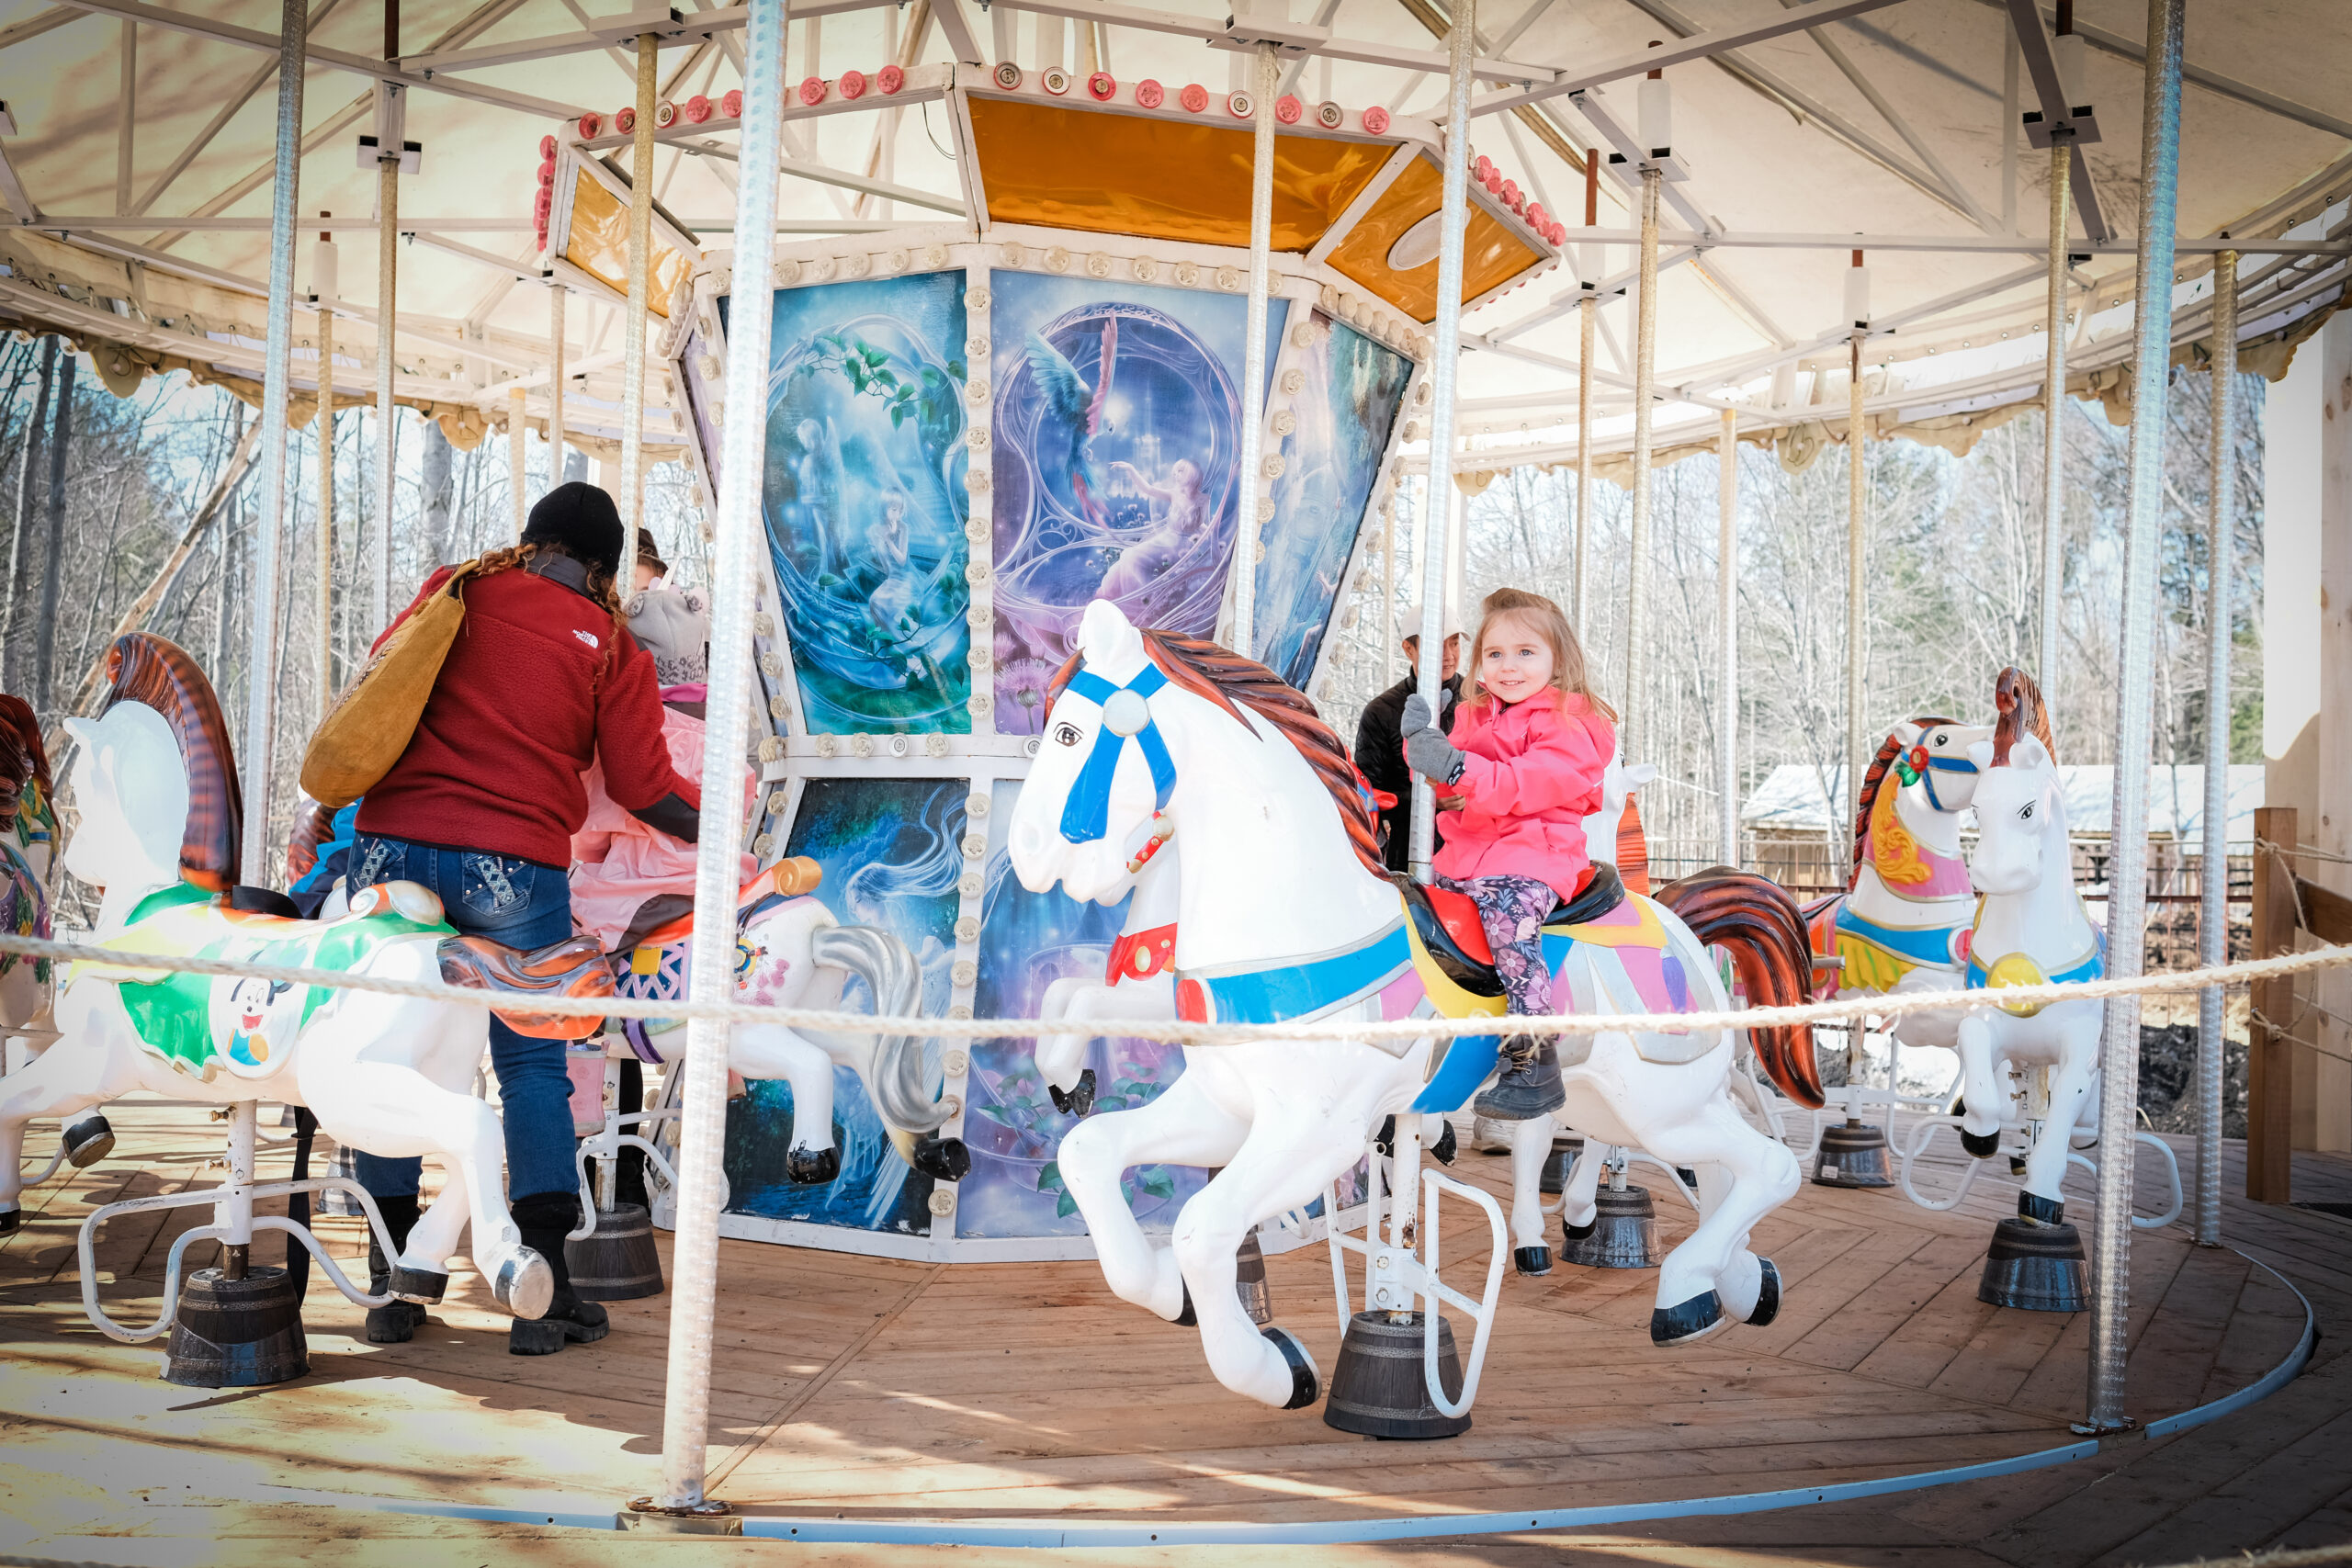 A child on the carousel